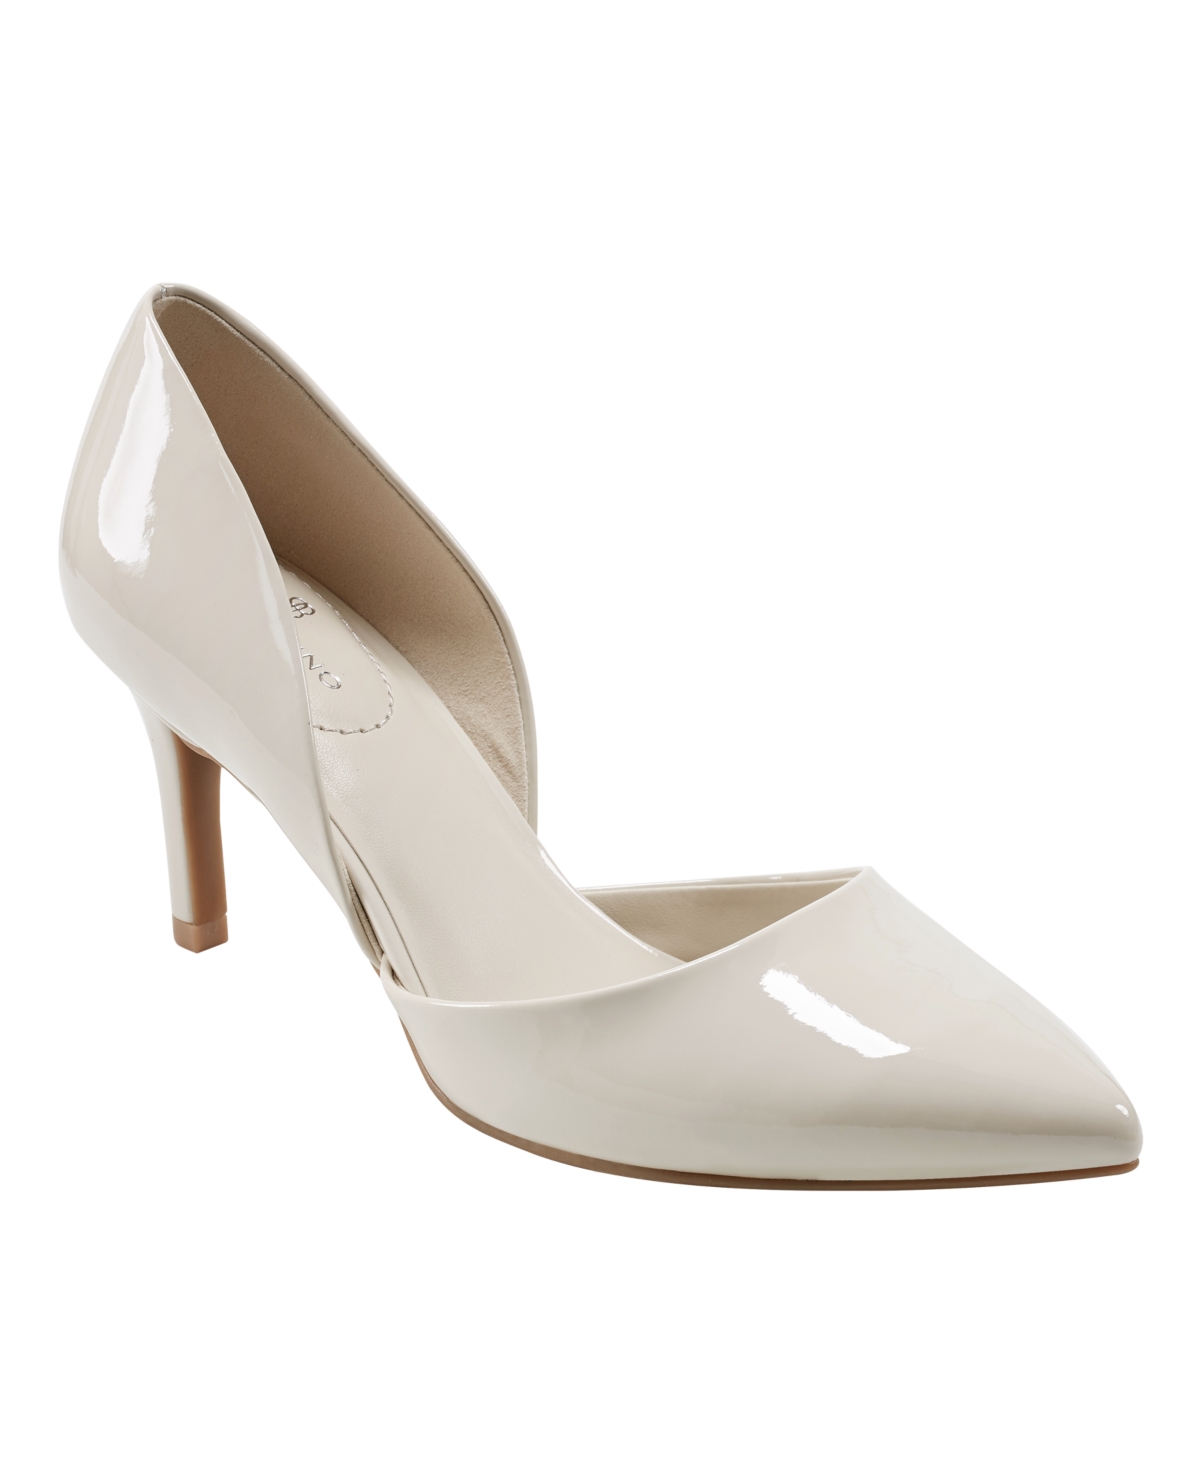 Bandolino Women's Grenow D'orsay Pumps In Ivory Patent